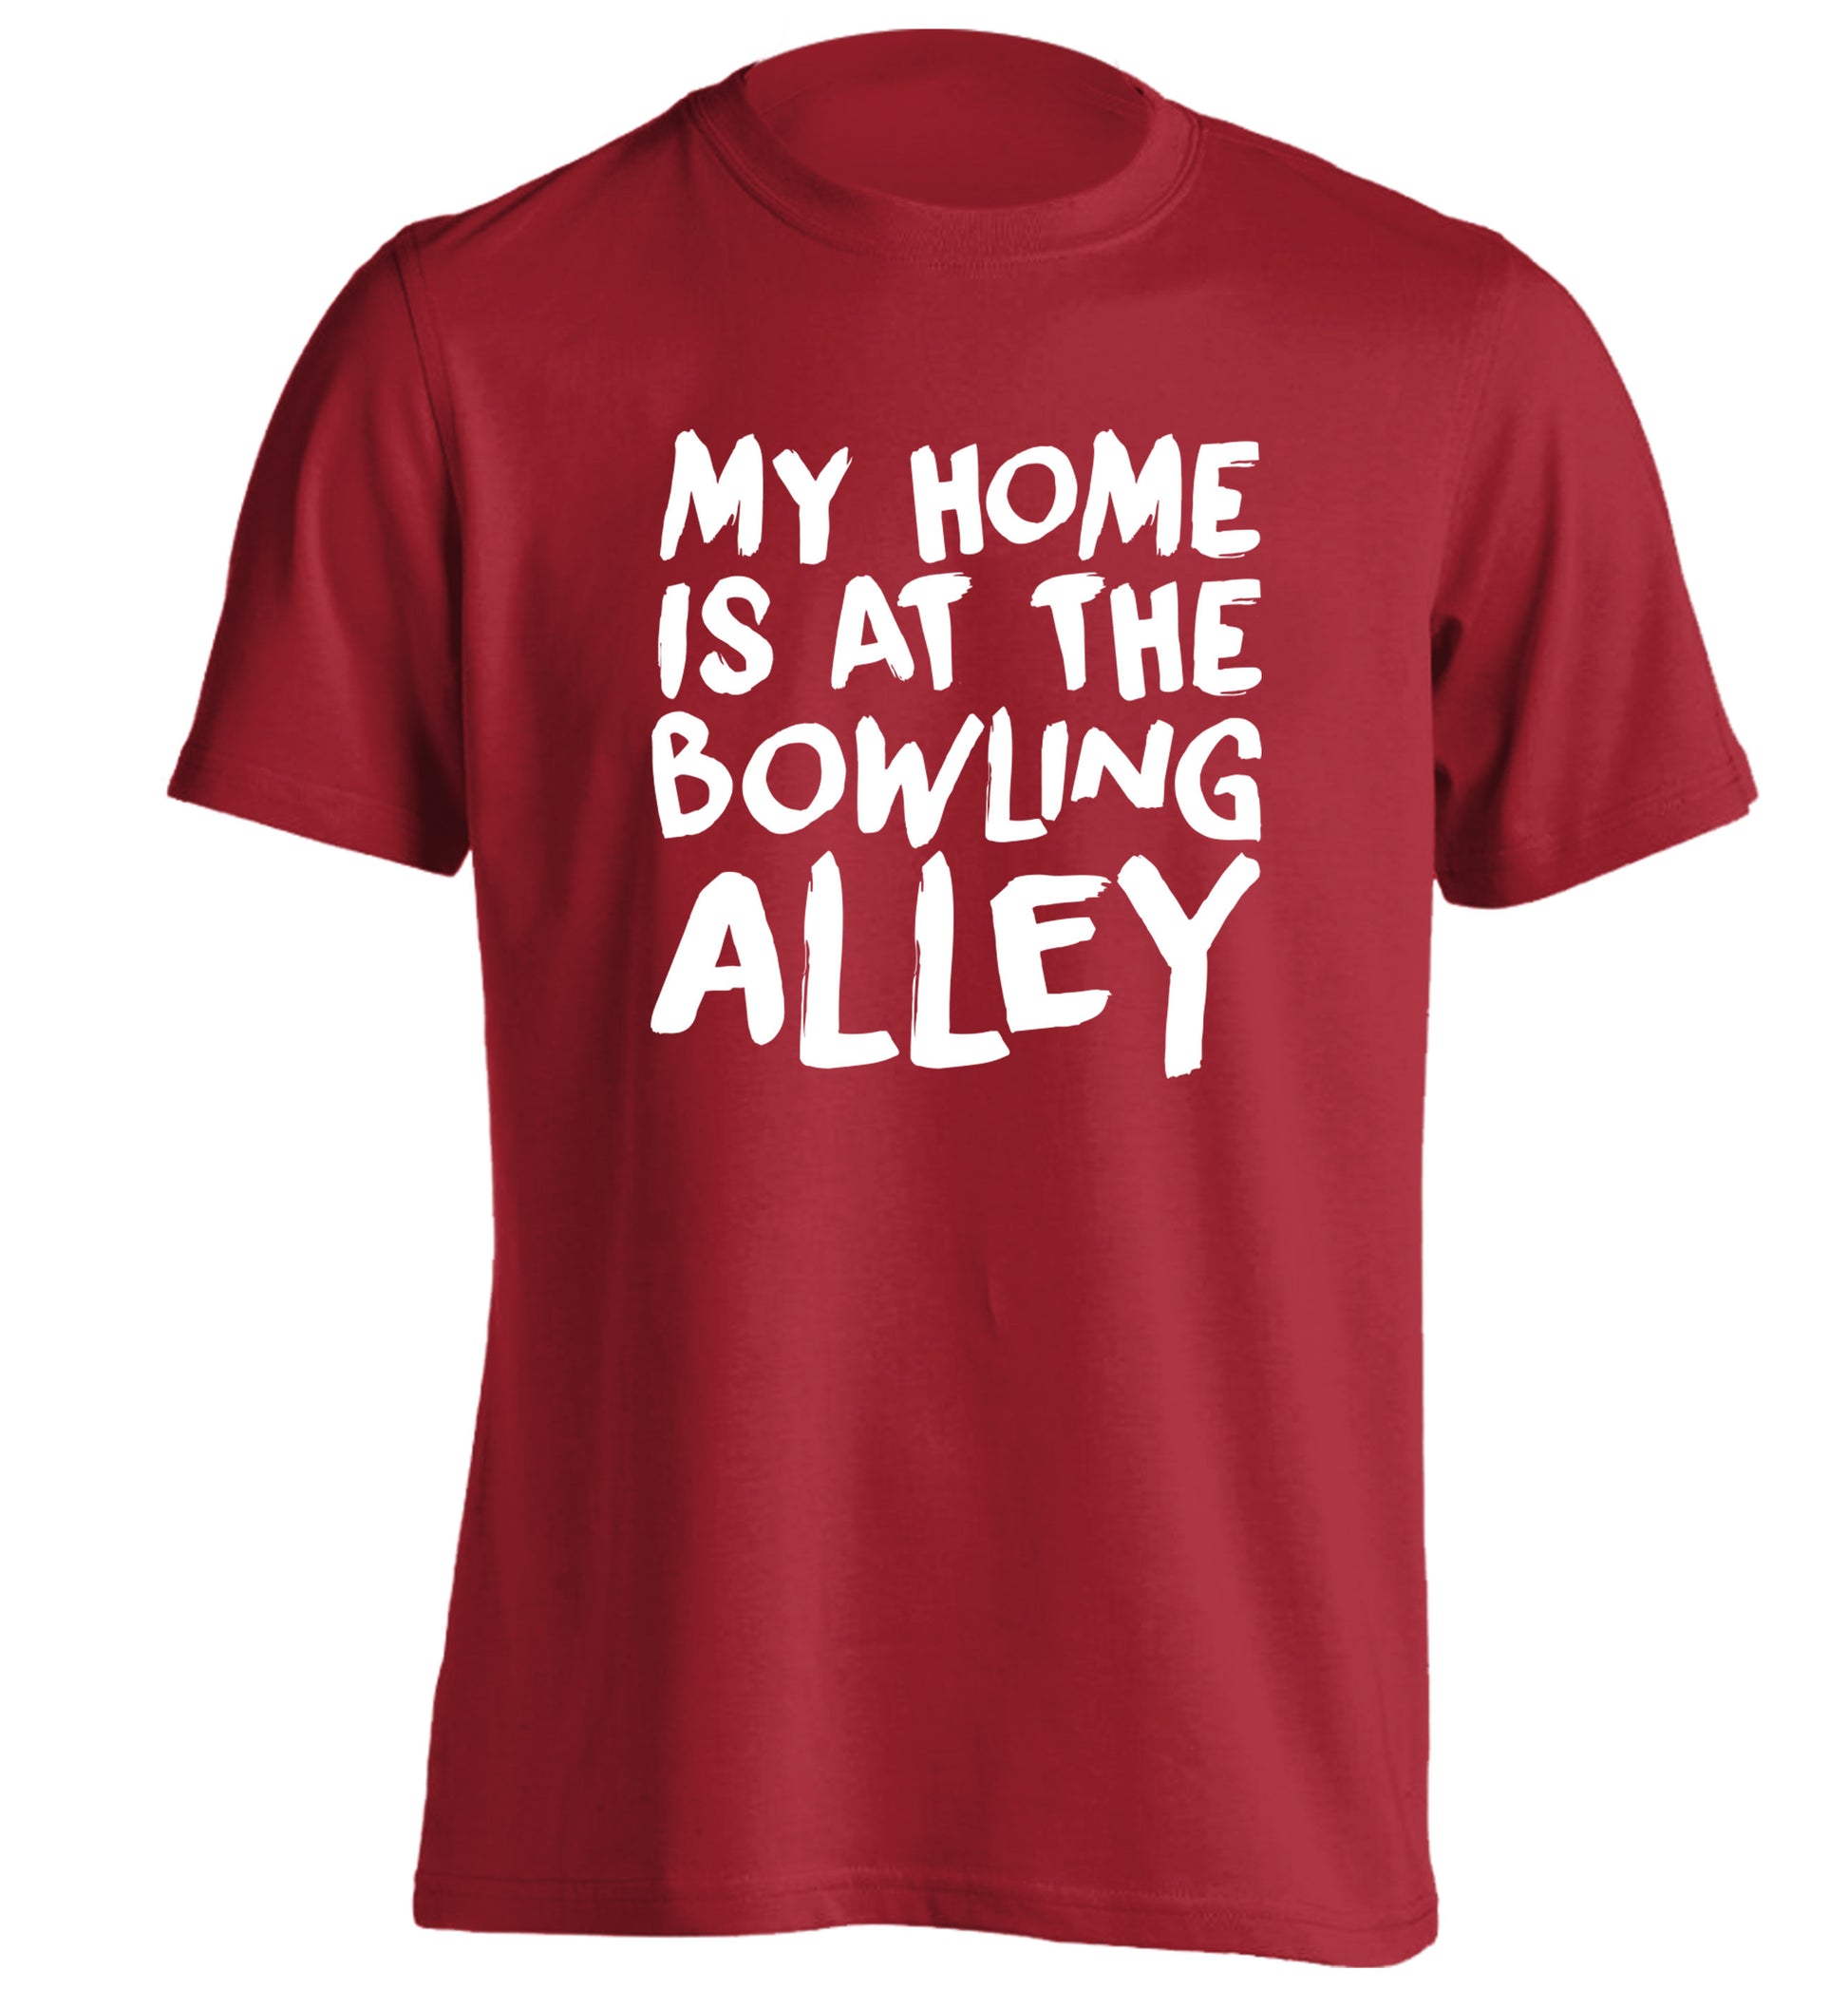 My home is at the bowling alley adults unisex red Tshirt 2XL